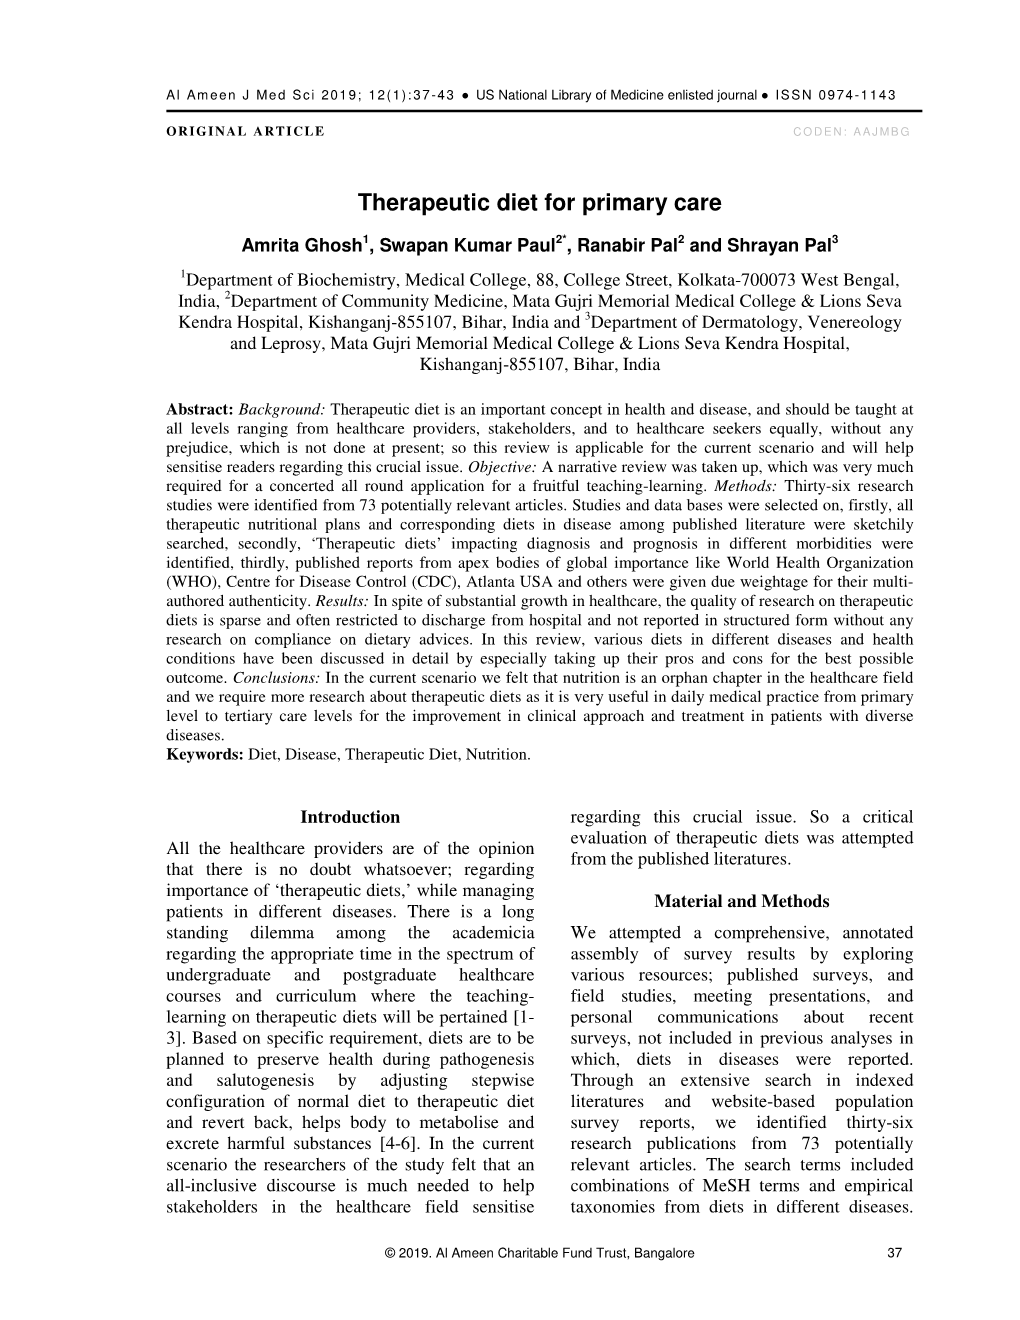 Therapeutic Diet for Primary Care